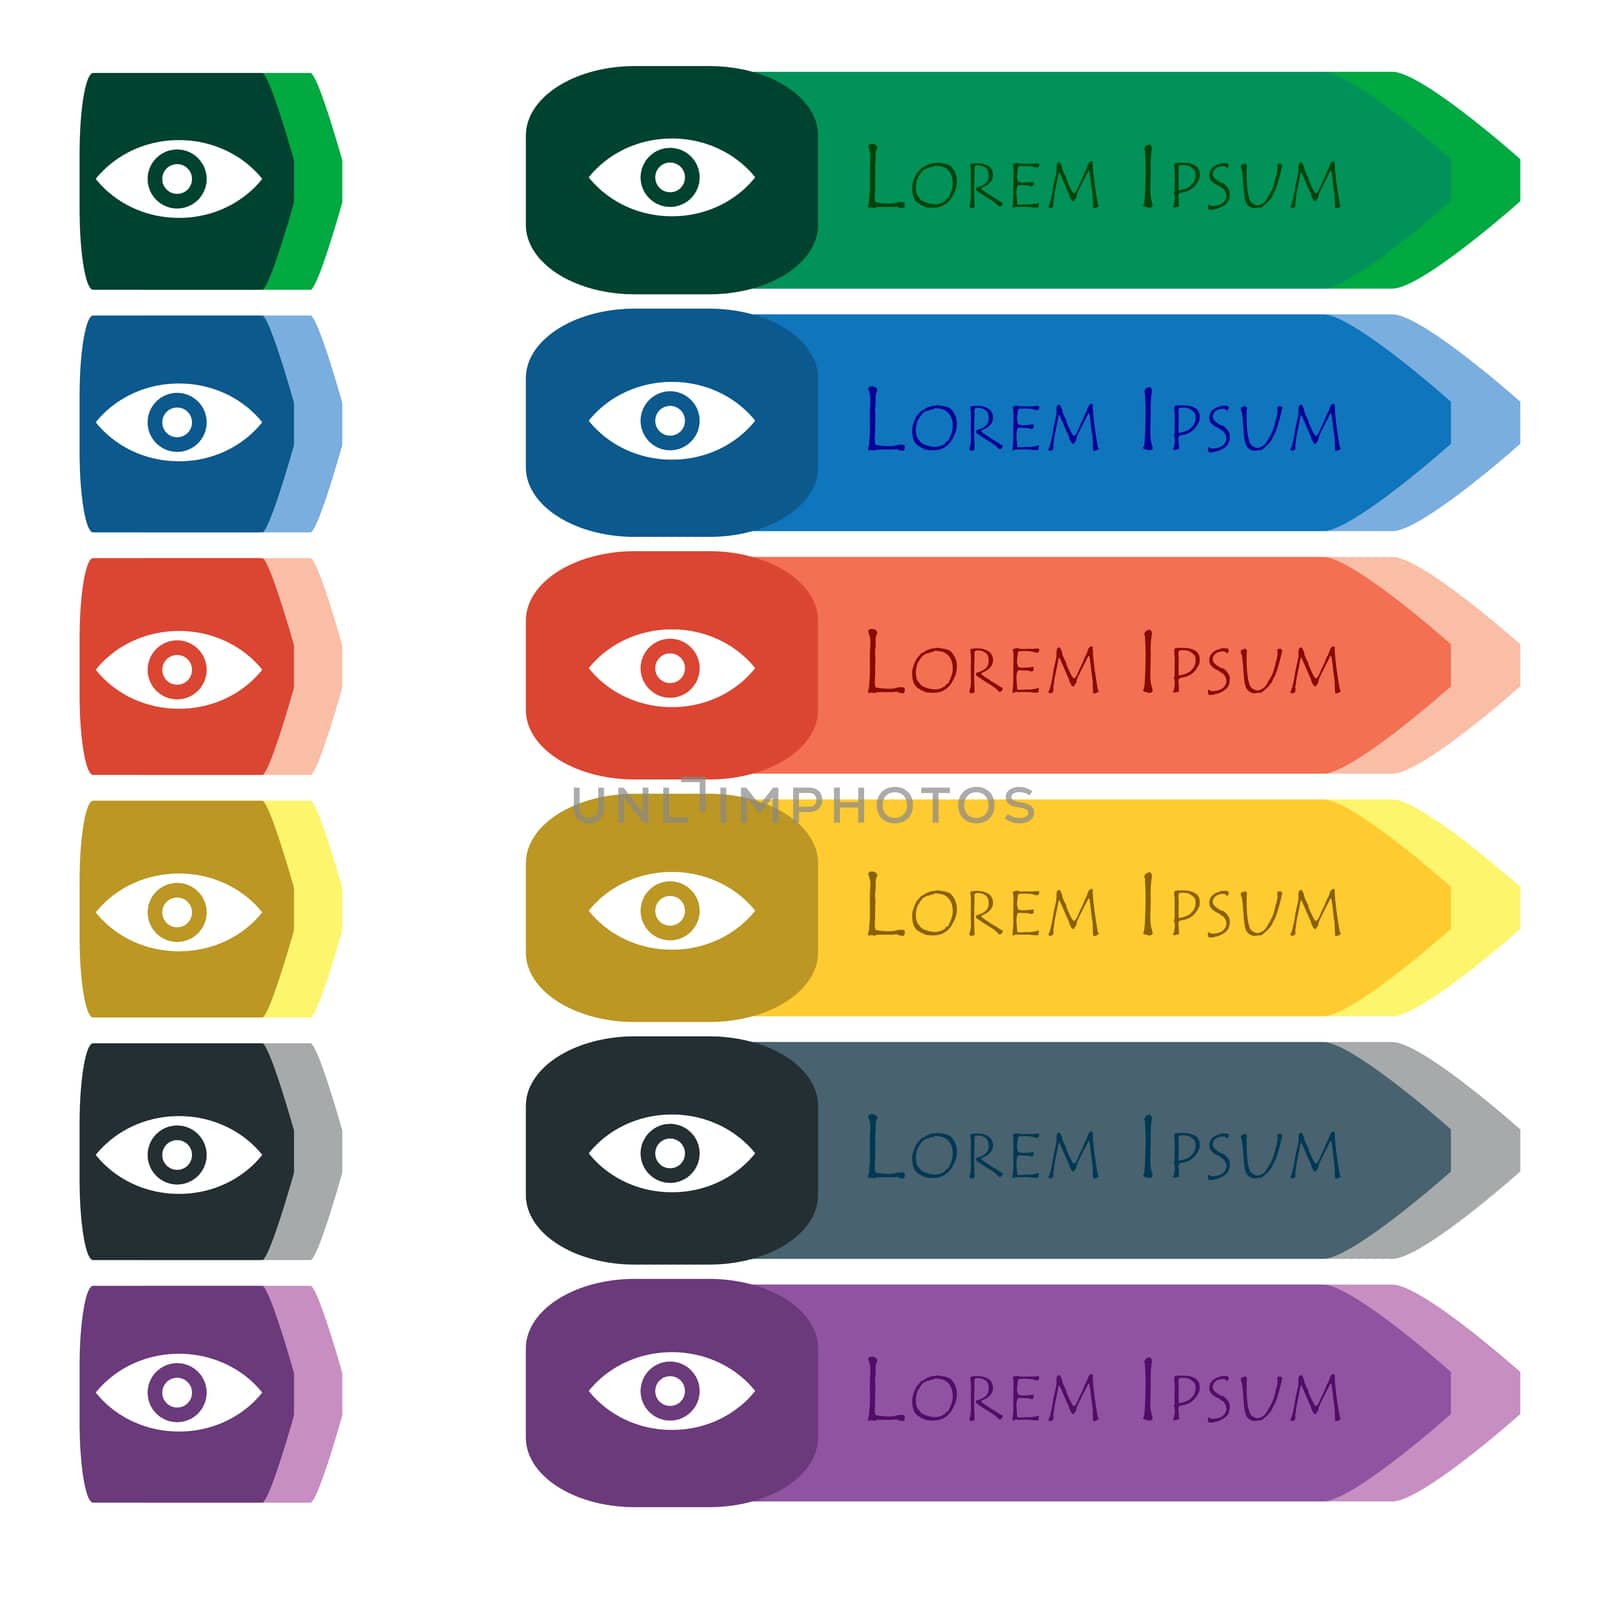 Eye, Publish content, sixth sense, intuition icon sign. Set of colorful, bright long buttons with additional small modules. Flat design. 